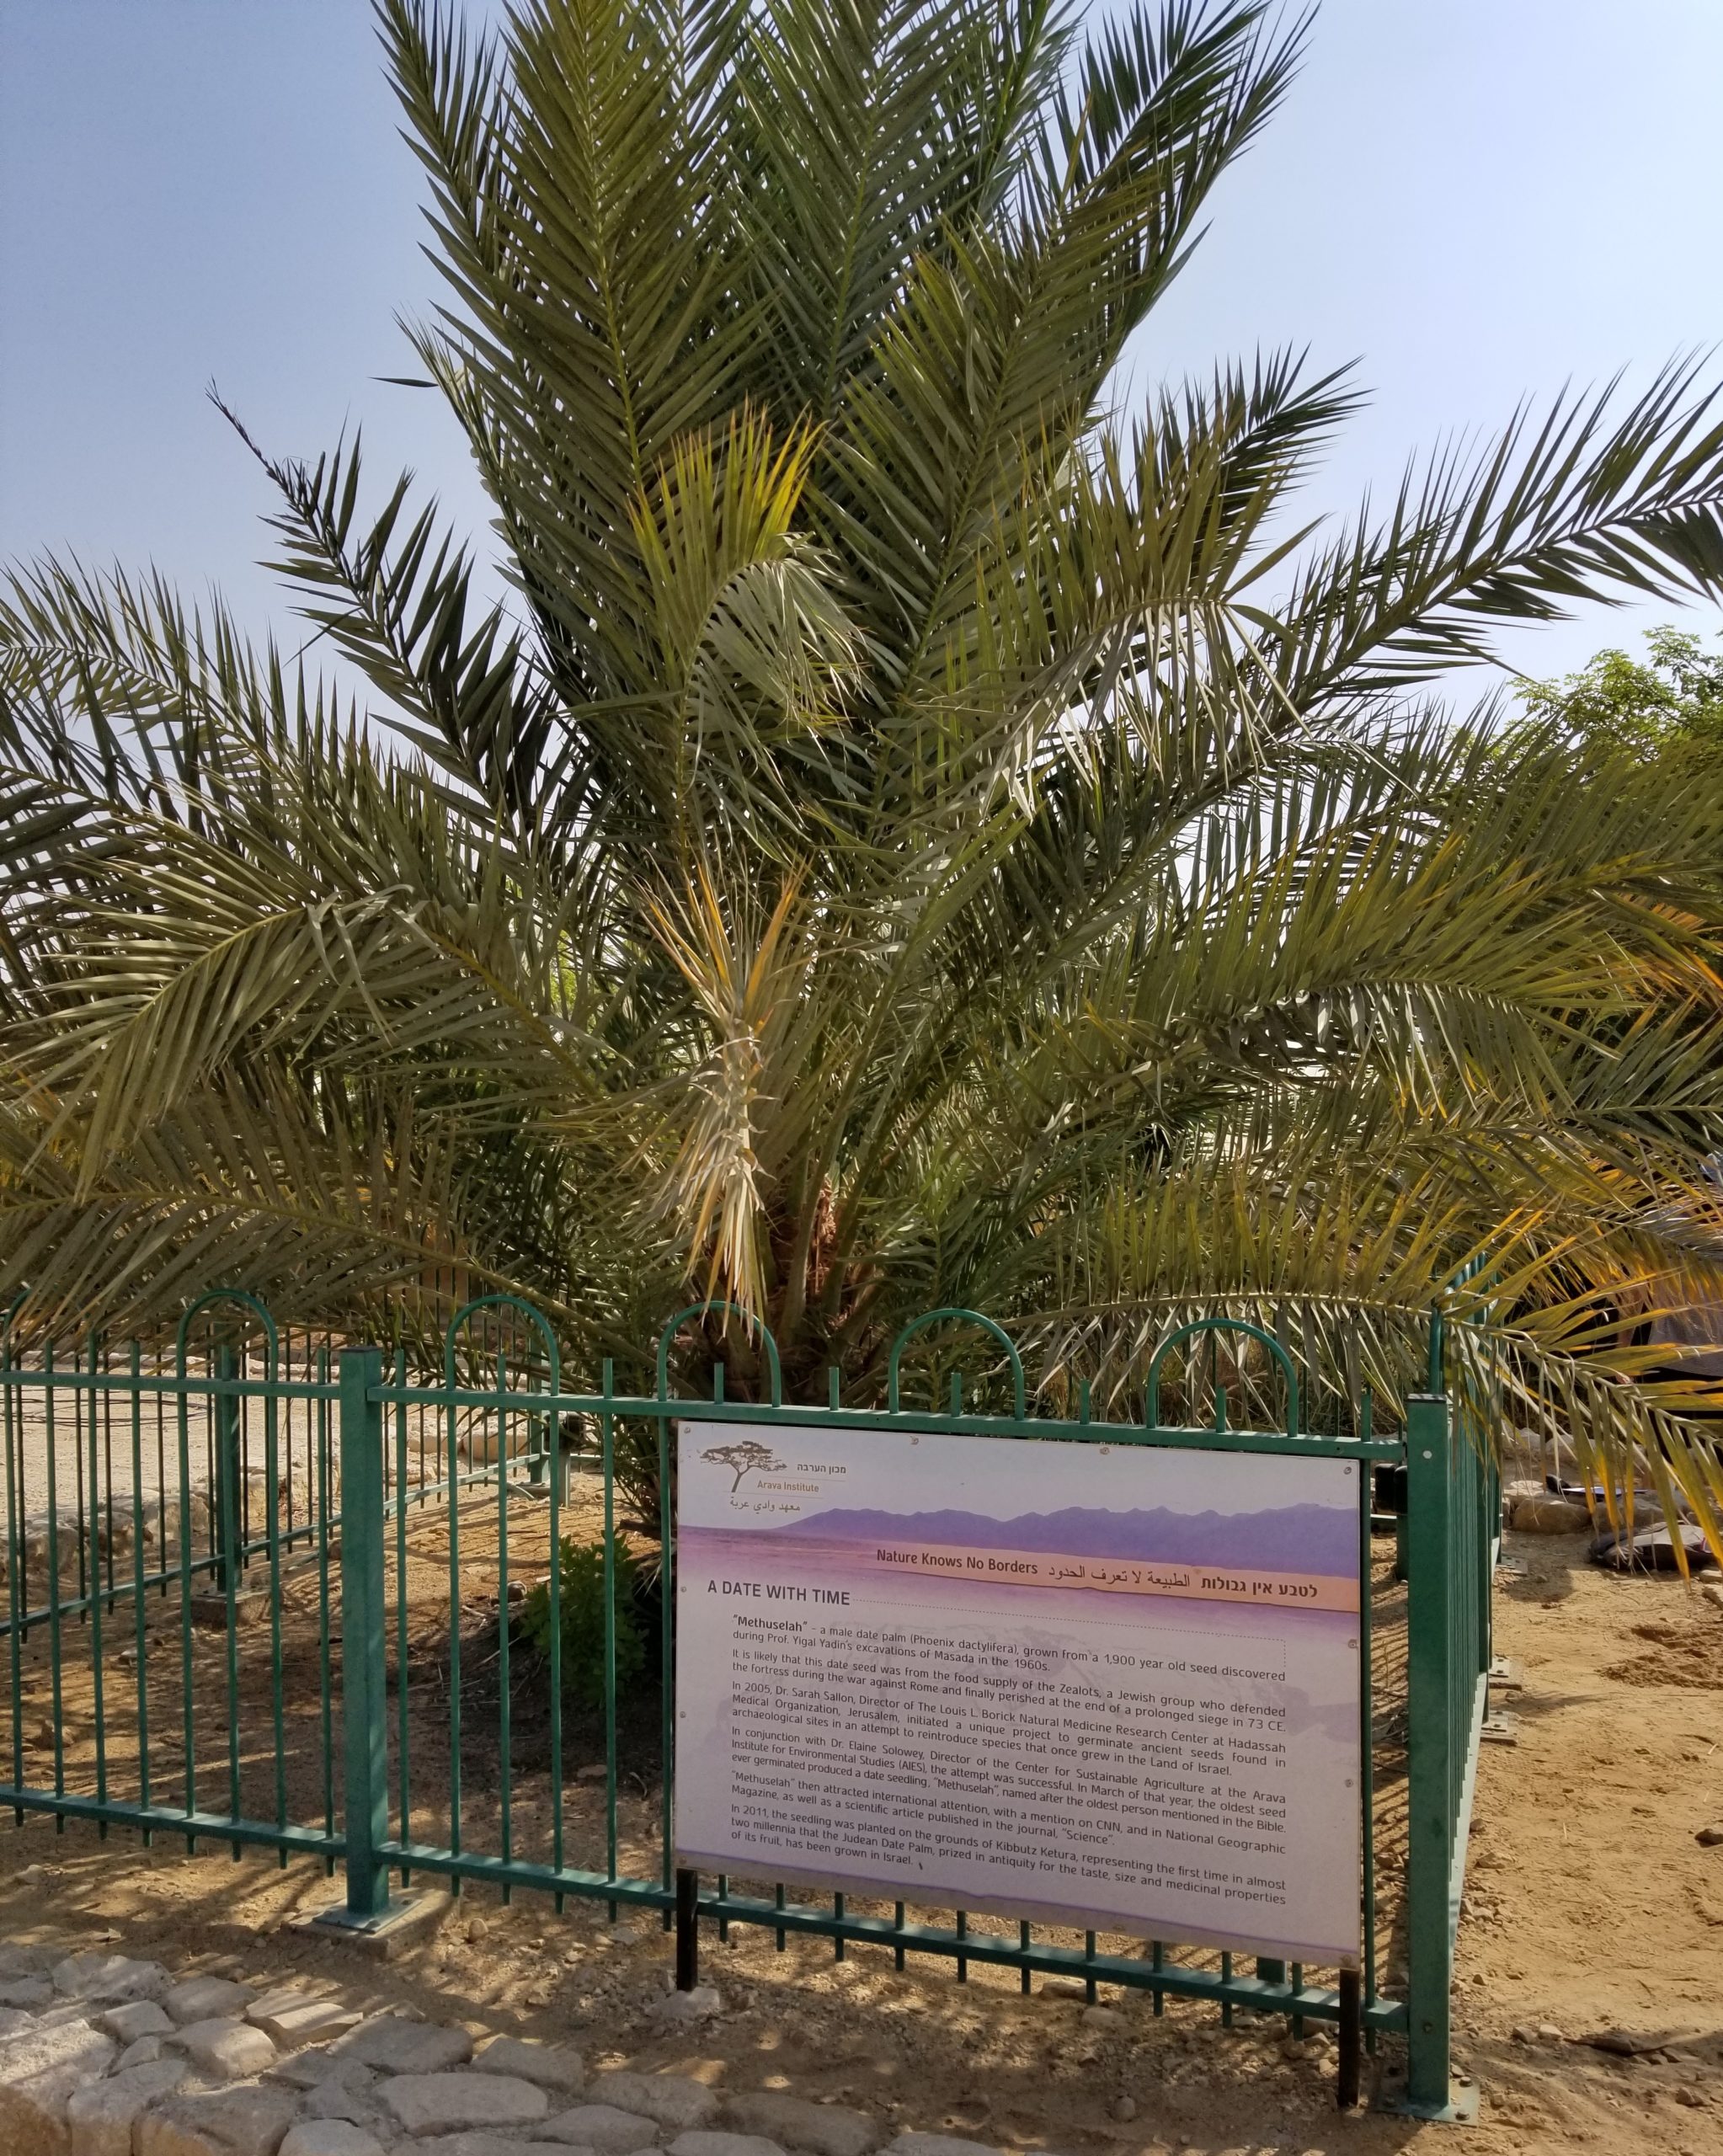 Methuselah, the date palm resurrected from a 1,900-year-old seed. (Image: Wikimedia Commons, Fair Use)